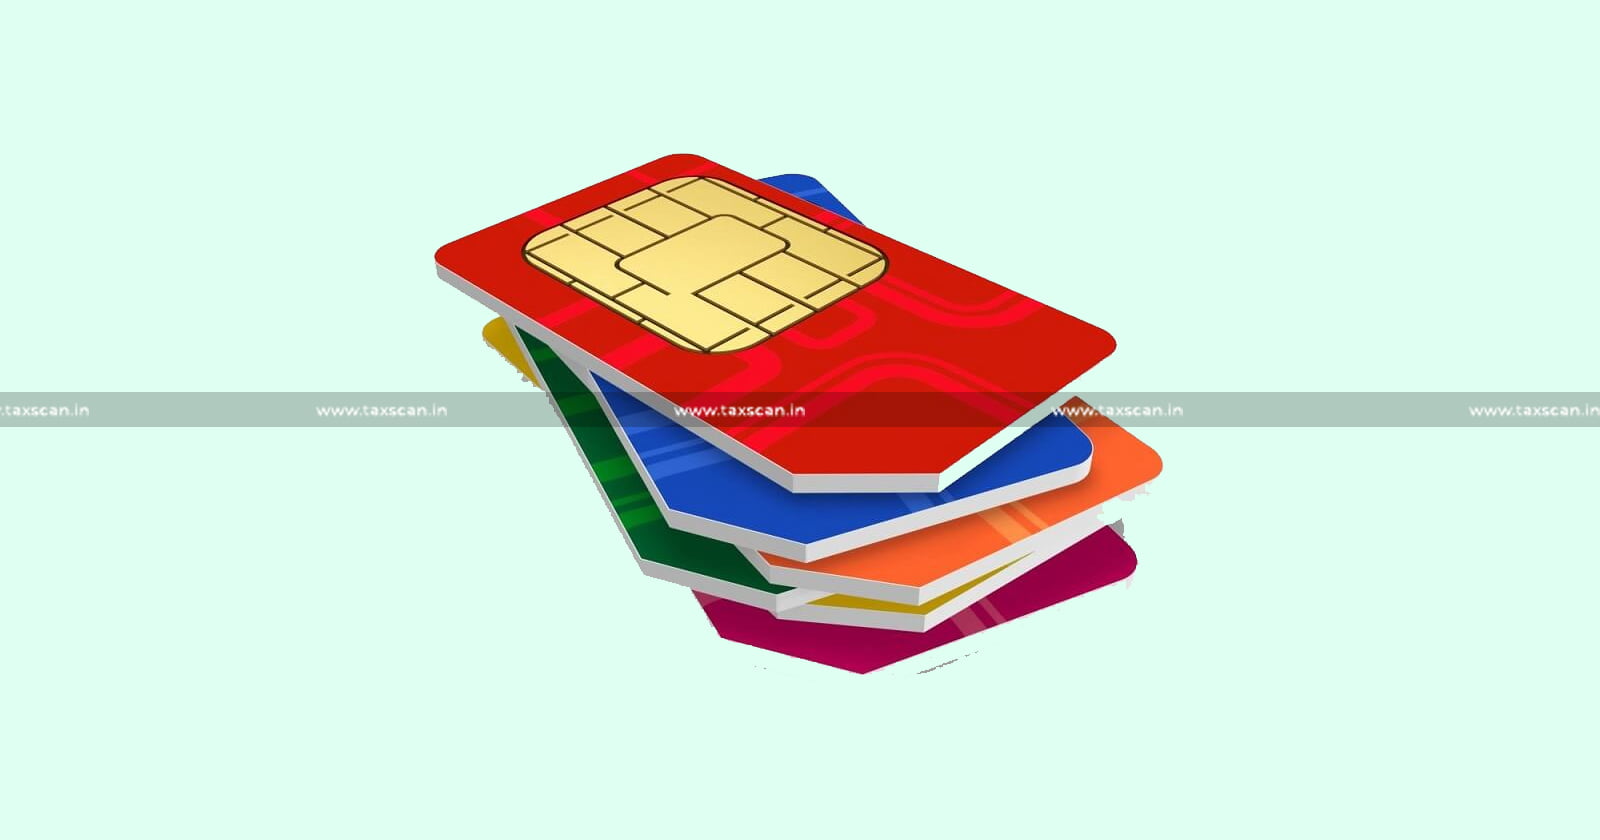 TDS - Pre-paid Sim Card - Discount charges - Pre-paid Sim Card Sold on Discount charges - Relation between Assessee and Distributor - Assessee - Distributor - Principal to Principal - ITAT - taxscan